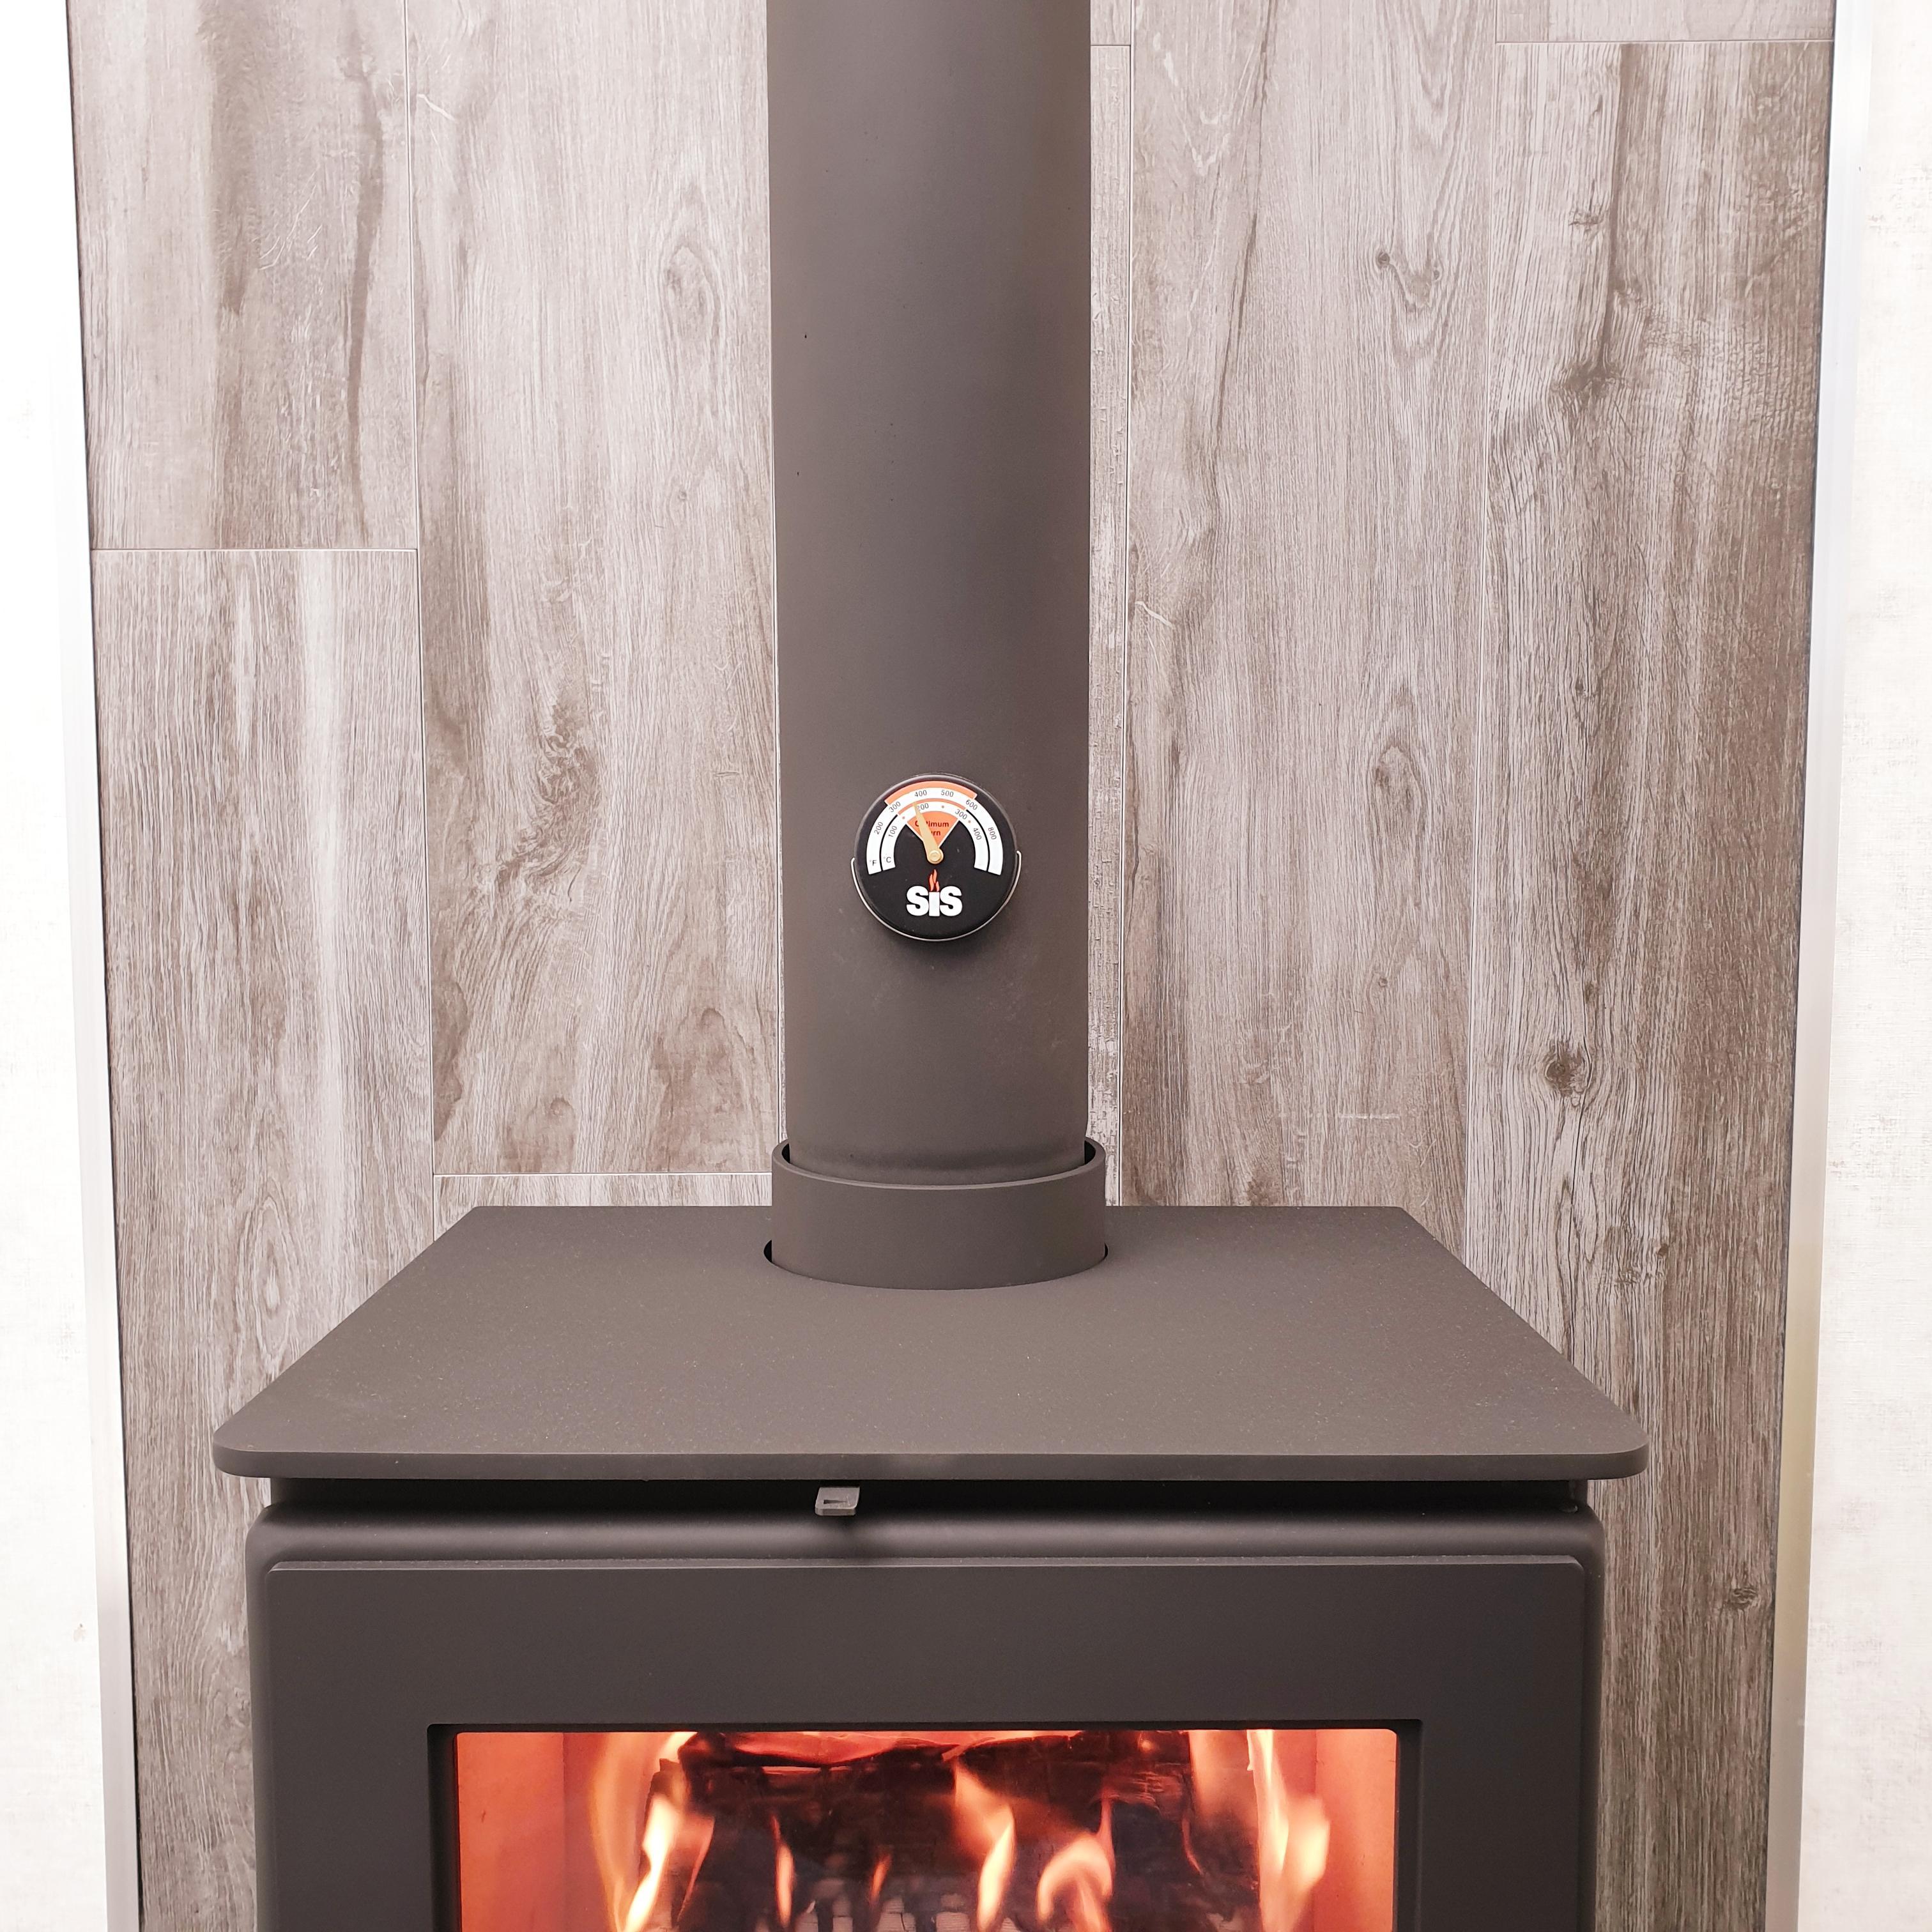 Parts Of A Wood Burning Stove Explained With Labeled Pictures Hot